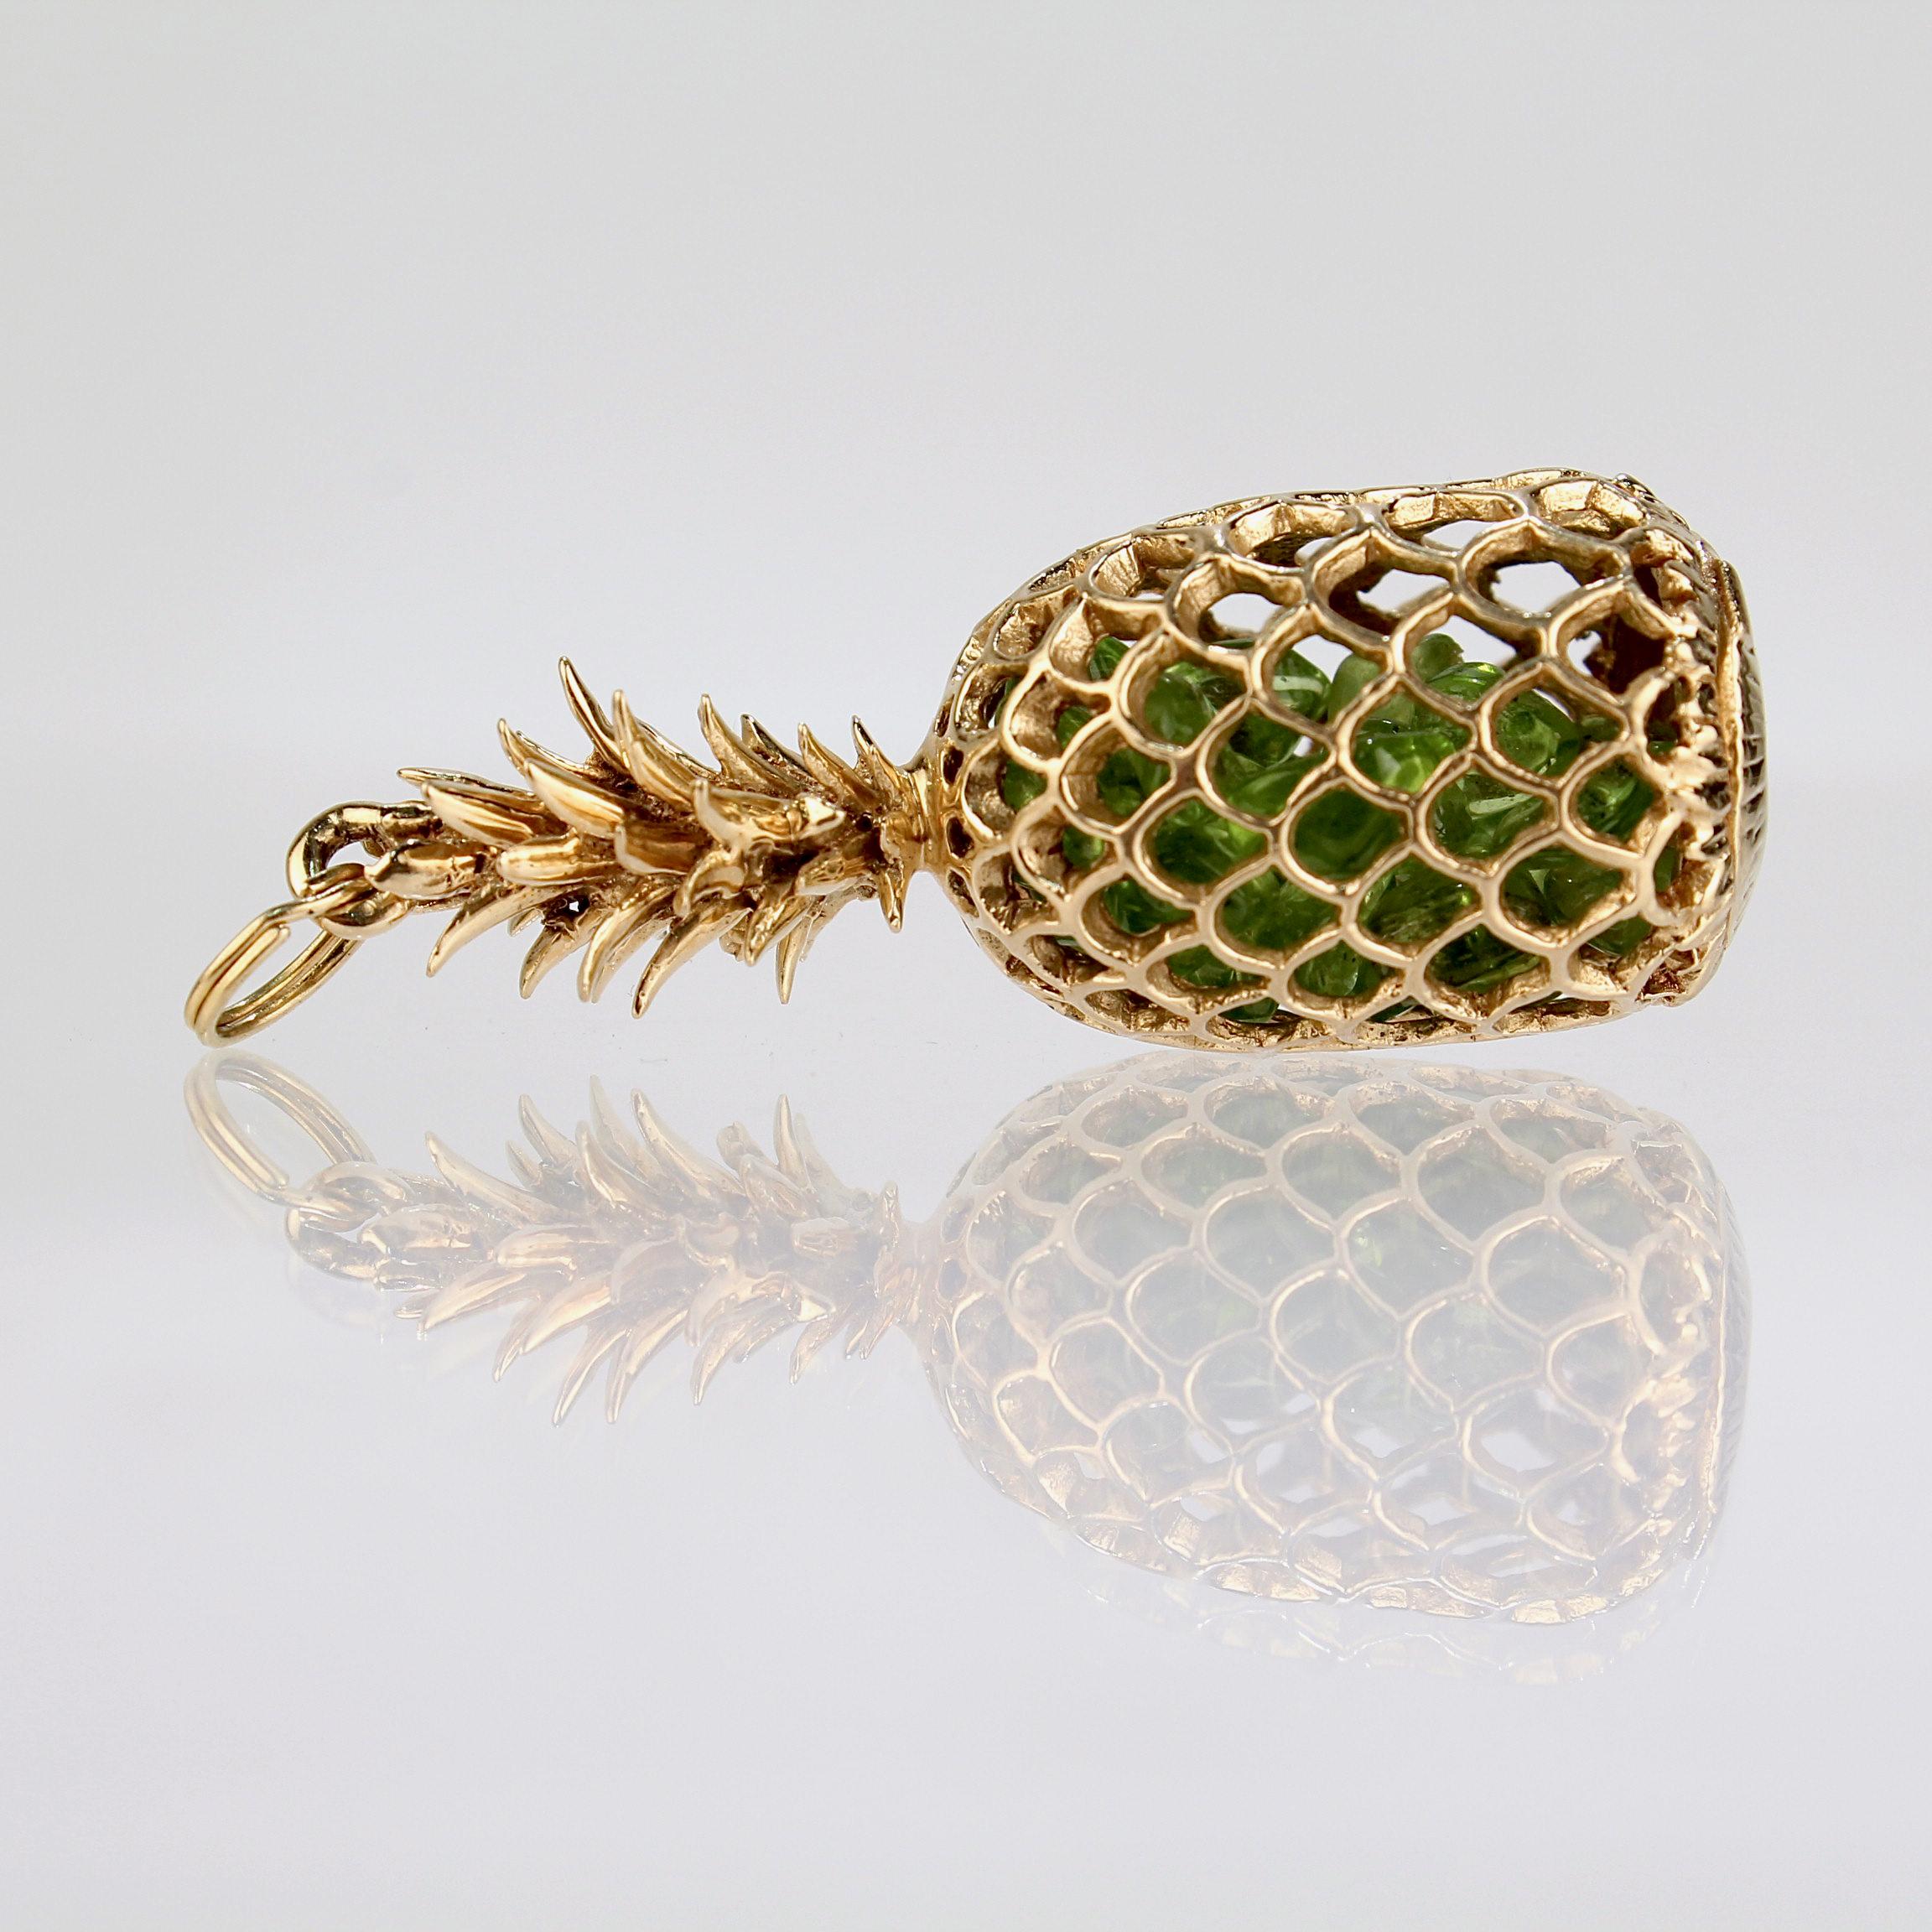 Retro Na Hoku / Edward Sultan 14k Gold & Emerald Pineapple Charm or Pendant  In Good Condition For Sale In Philadelphia, PA